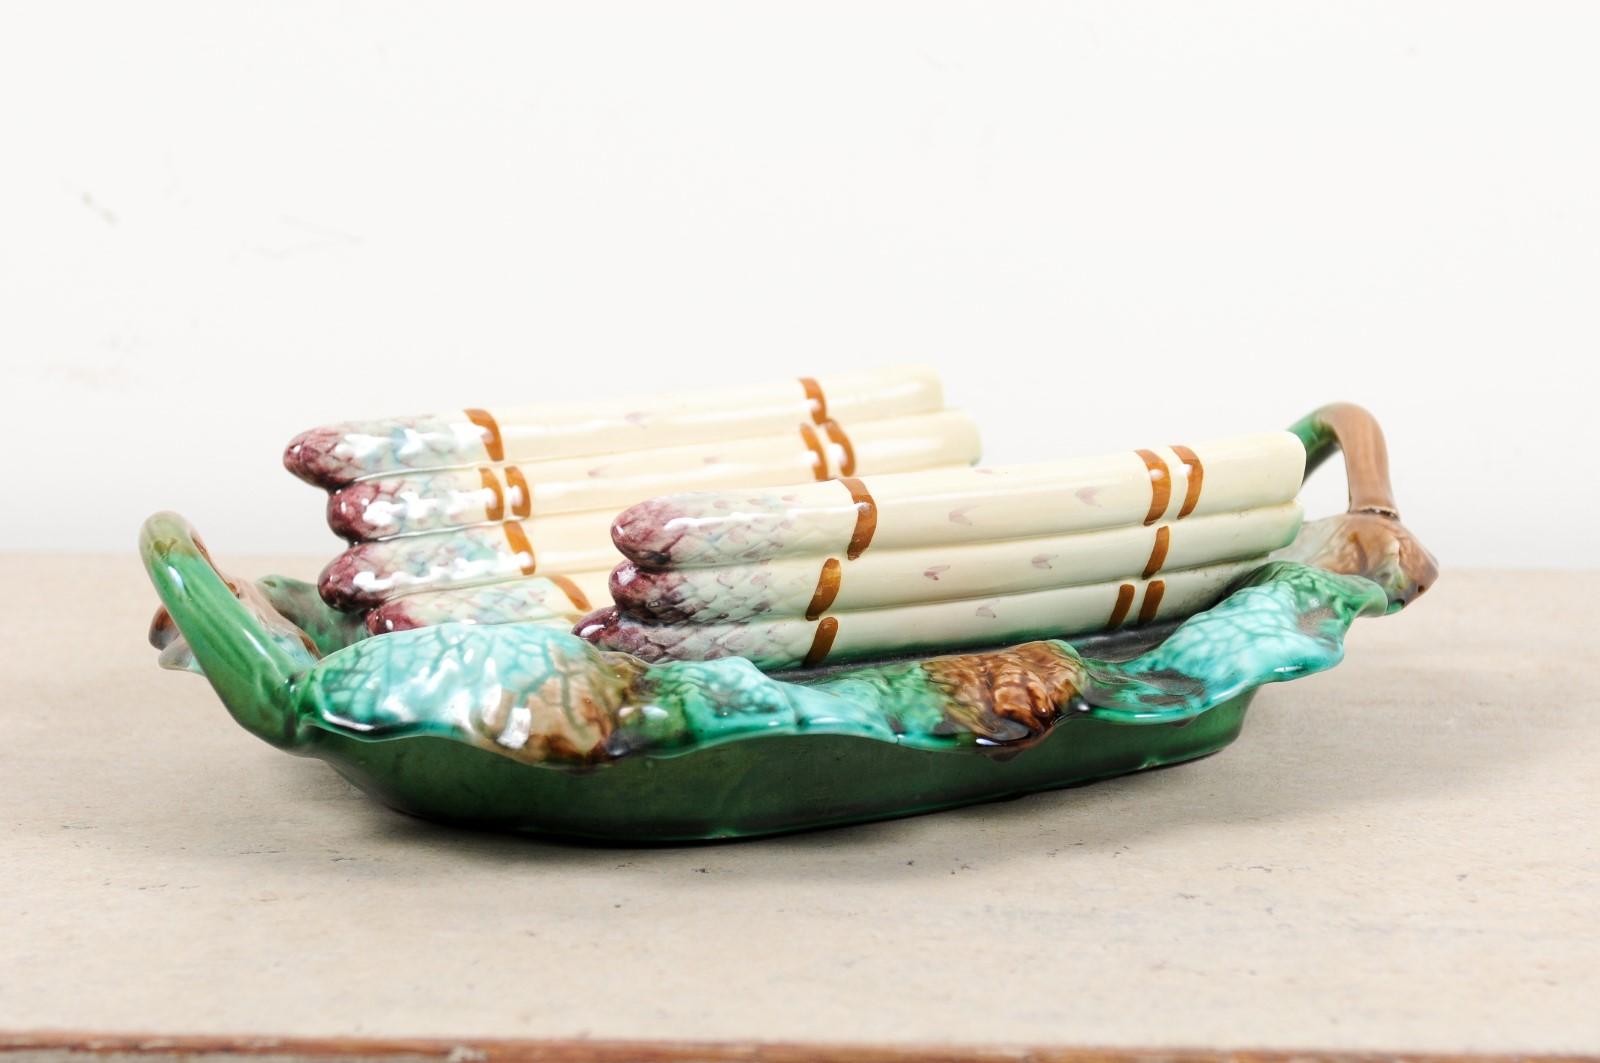 French 19th Century Longchamp Majolica Asparagus Server with Foliage Platter For Sale 3